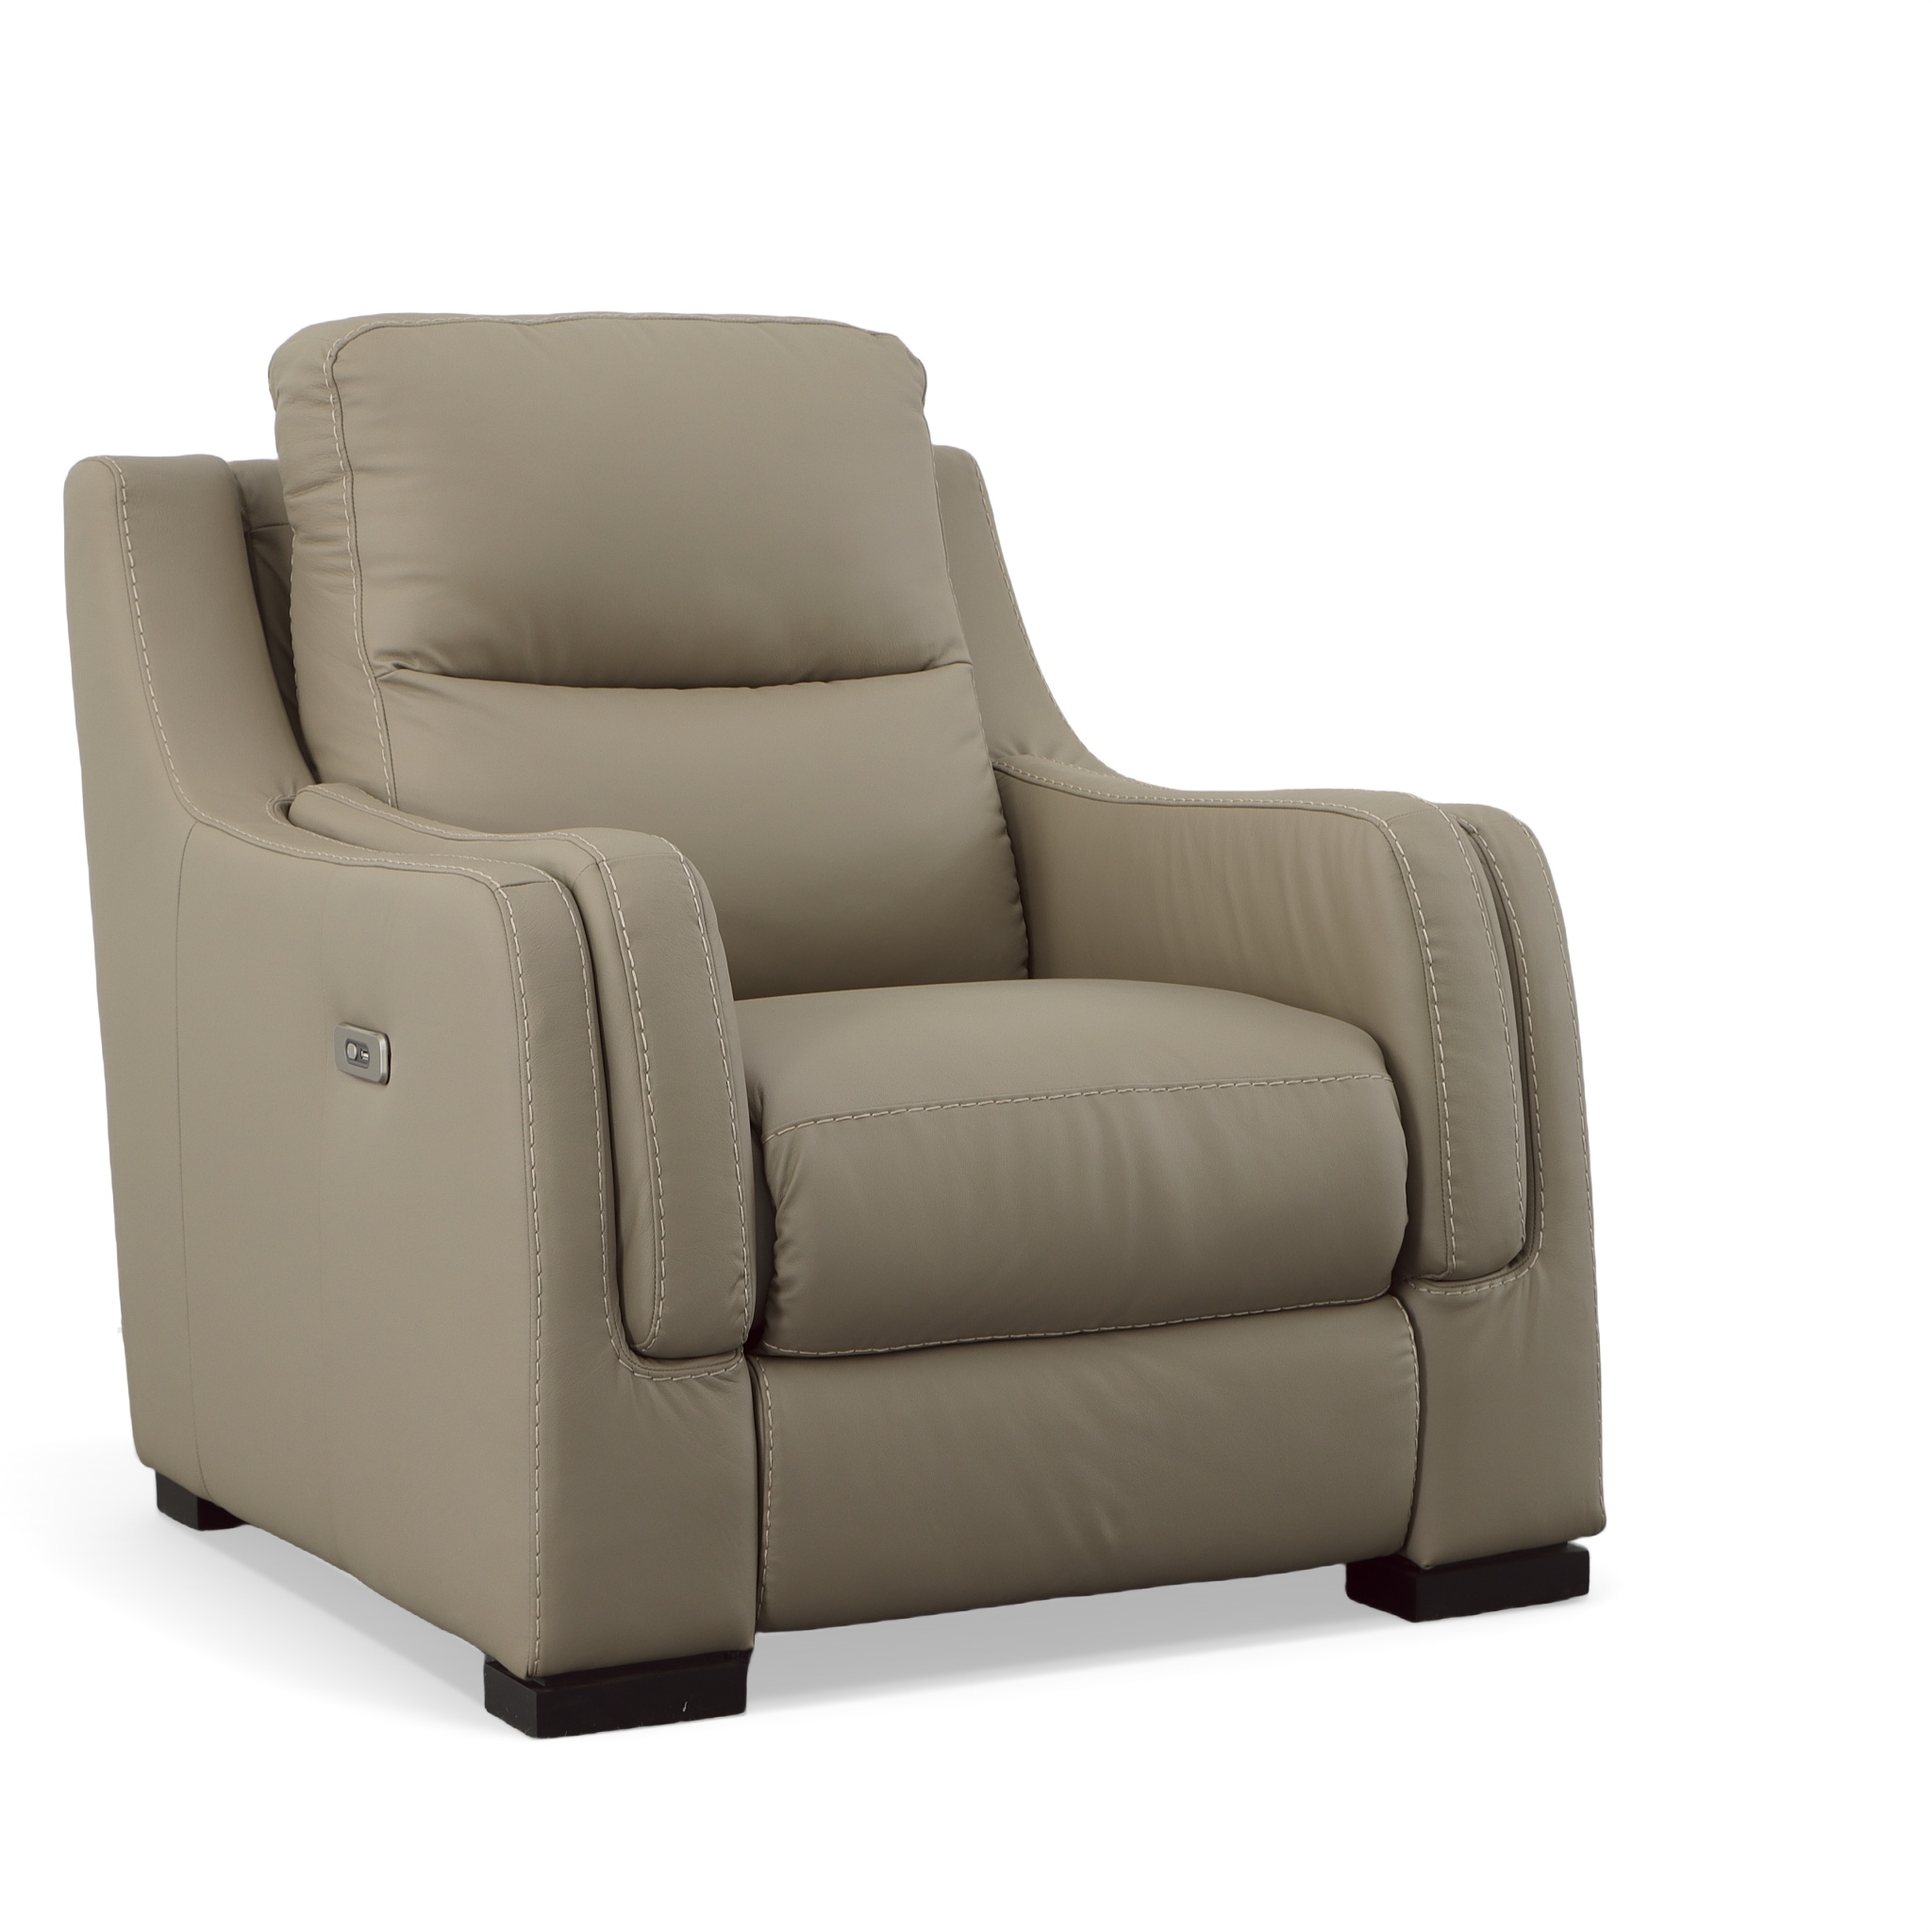 Hanna Leather Power Recliner